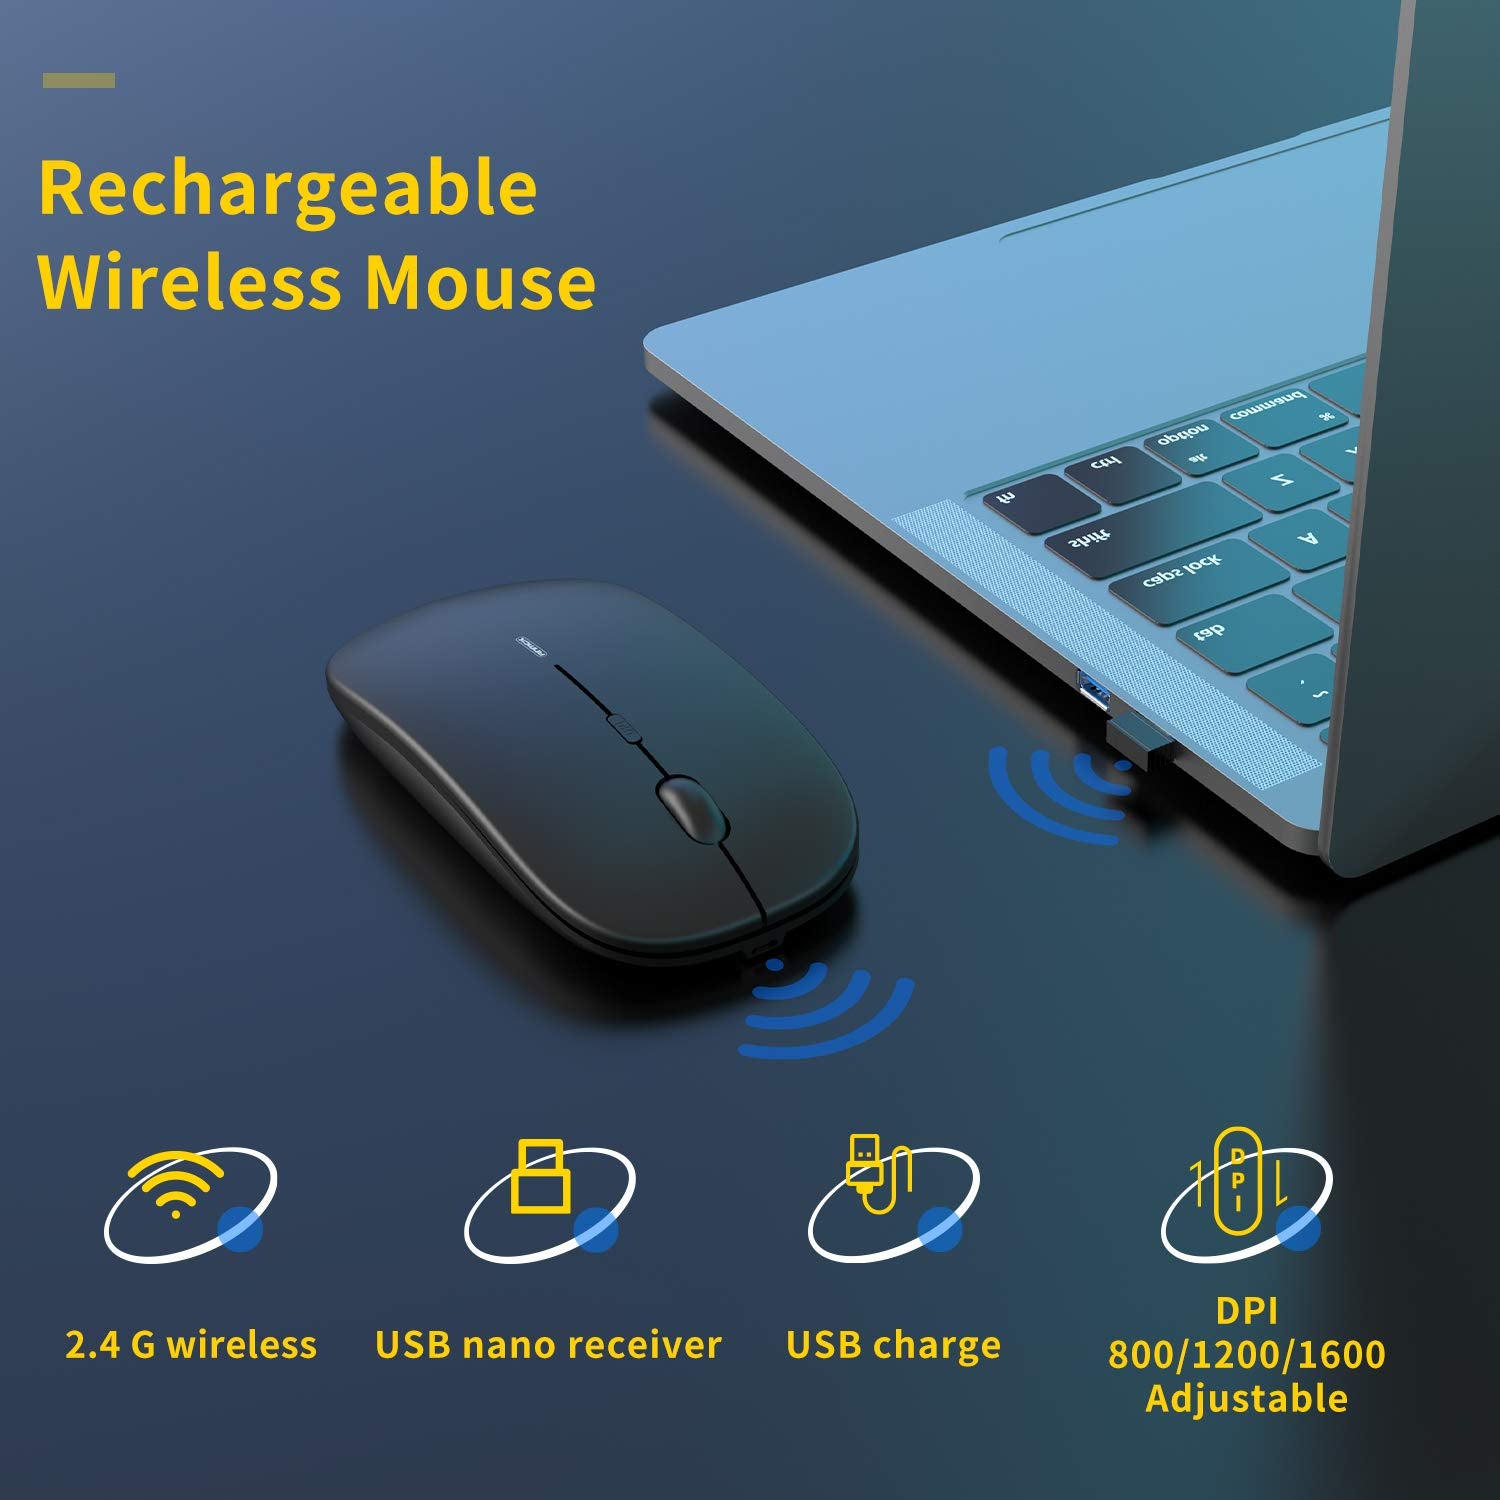 Wireless Silent Mouse,USB Laptop PC Cordless Mouse Rechargeable Slim Mice by Anmck,10m Remote Range,1600 DPI 3 Adjustment Levels Noiseless Mini Mouse ,Home & Office for Windows,MAC OS and Linux-Black